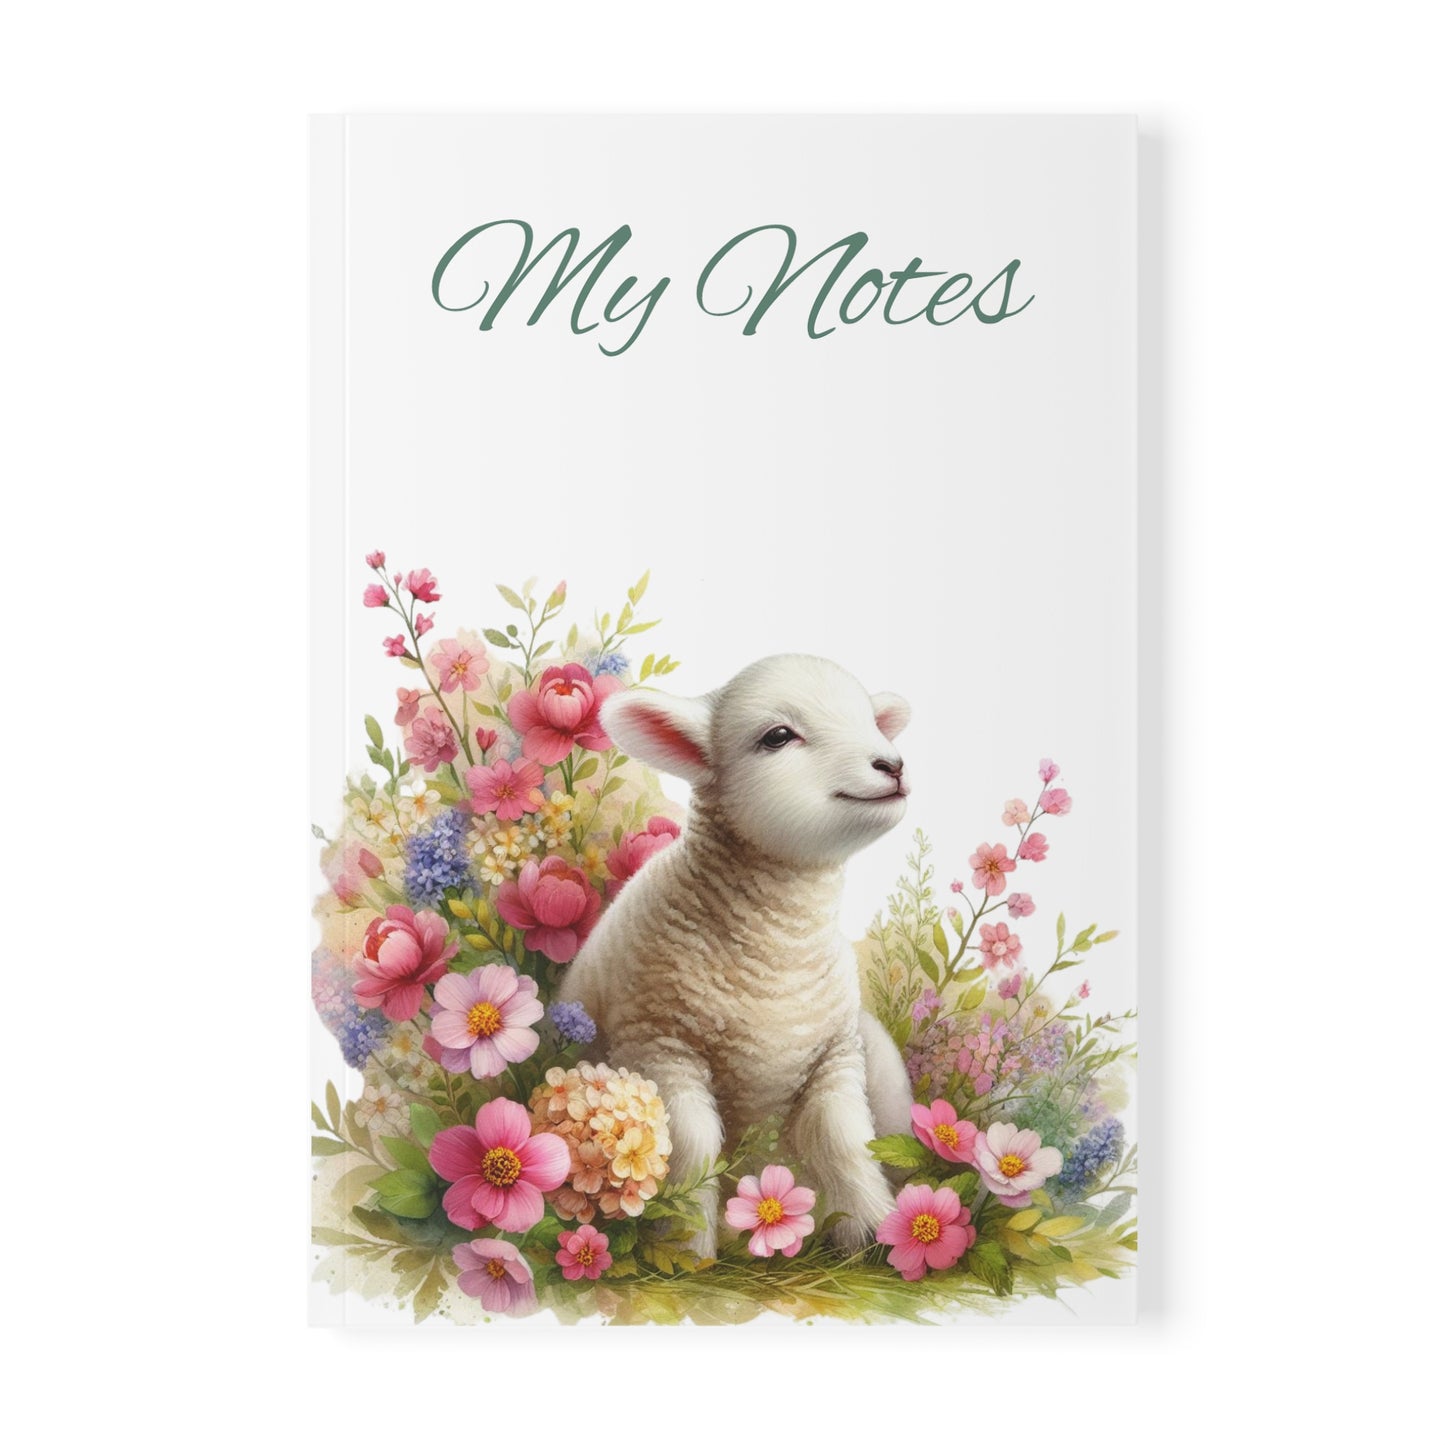 Lamb Softback Notebook | Stationery by Hope Valley Home